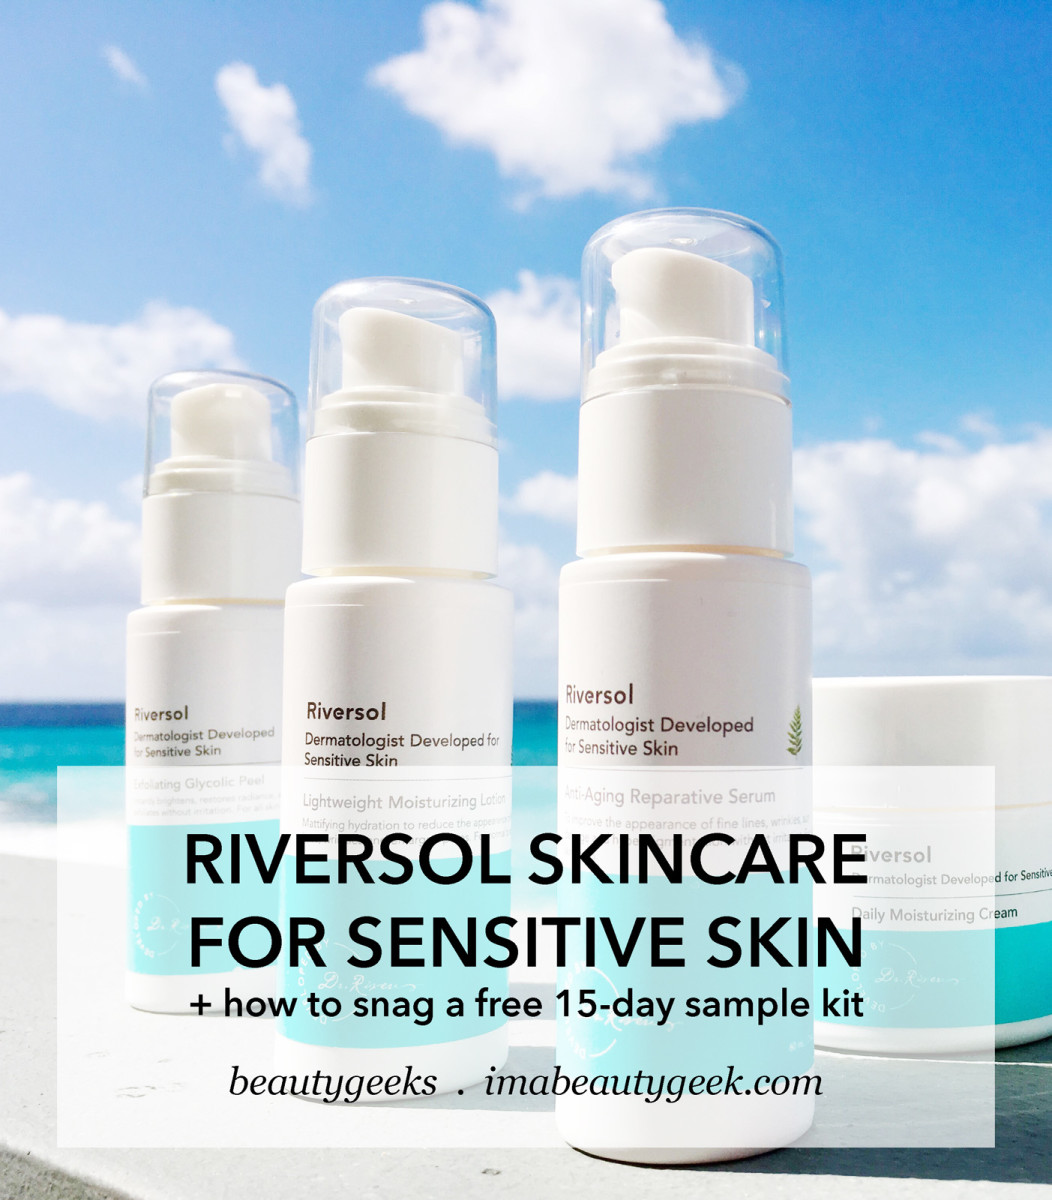 Riversol Skincare for Sensitive Skin_how to get a free 15-day kit